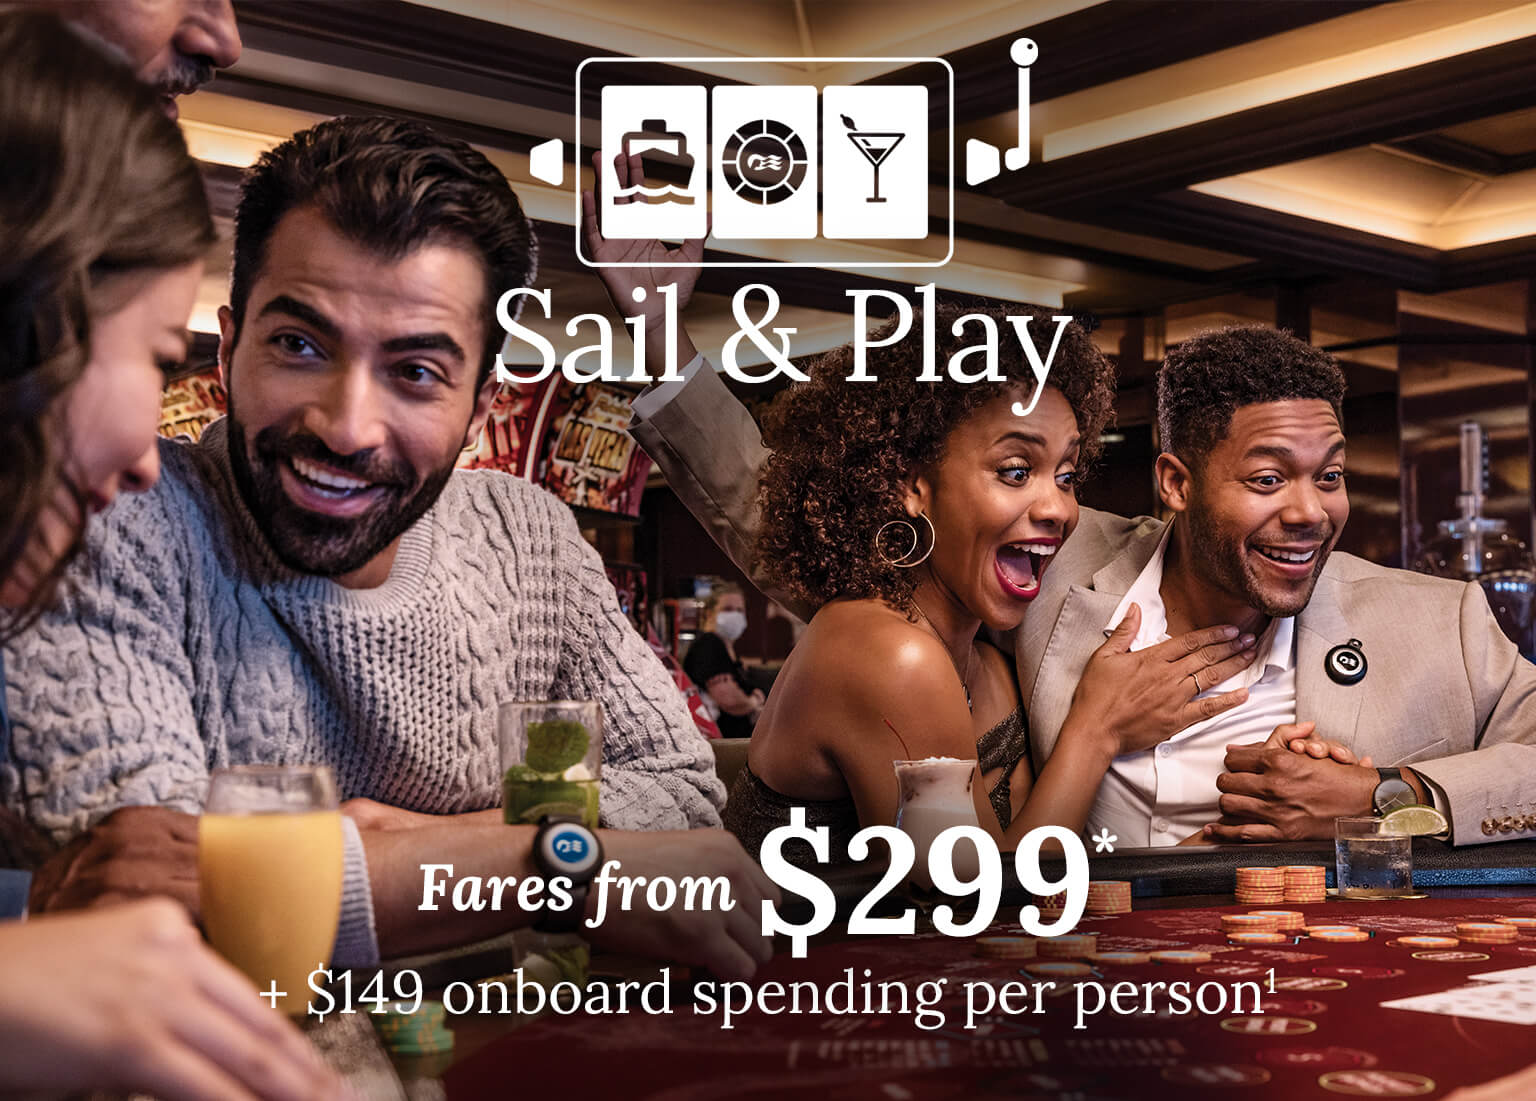 Group of people playing table poker. fares from $299. $149 onboard spending per person on voyages 7 days or longer. Click here to book.